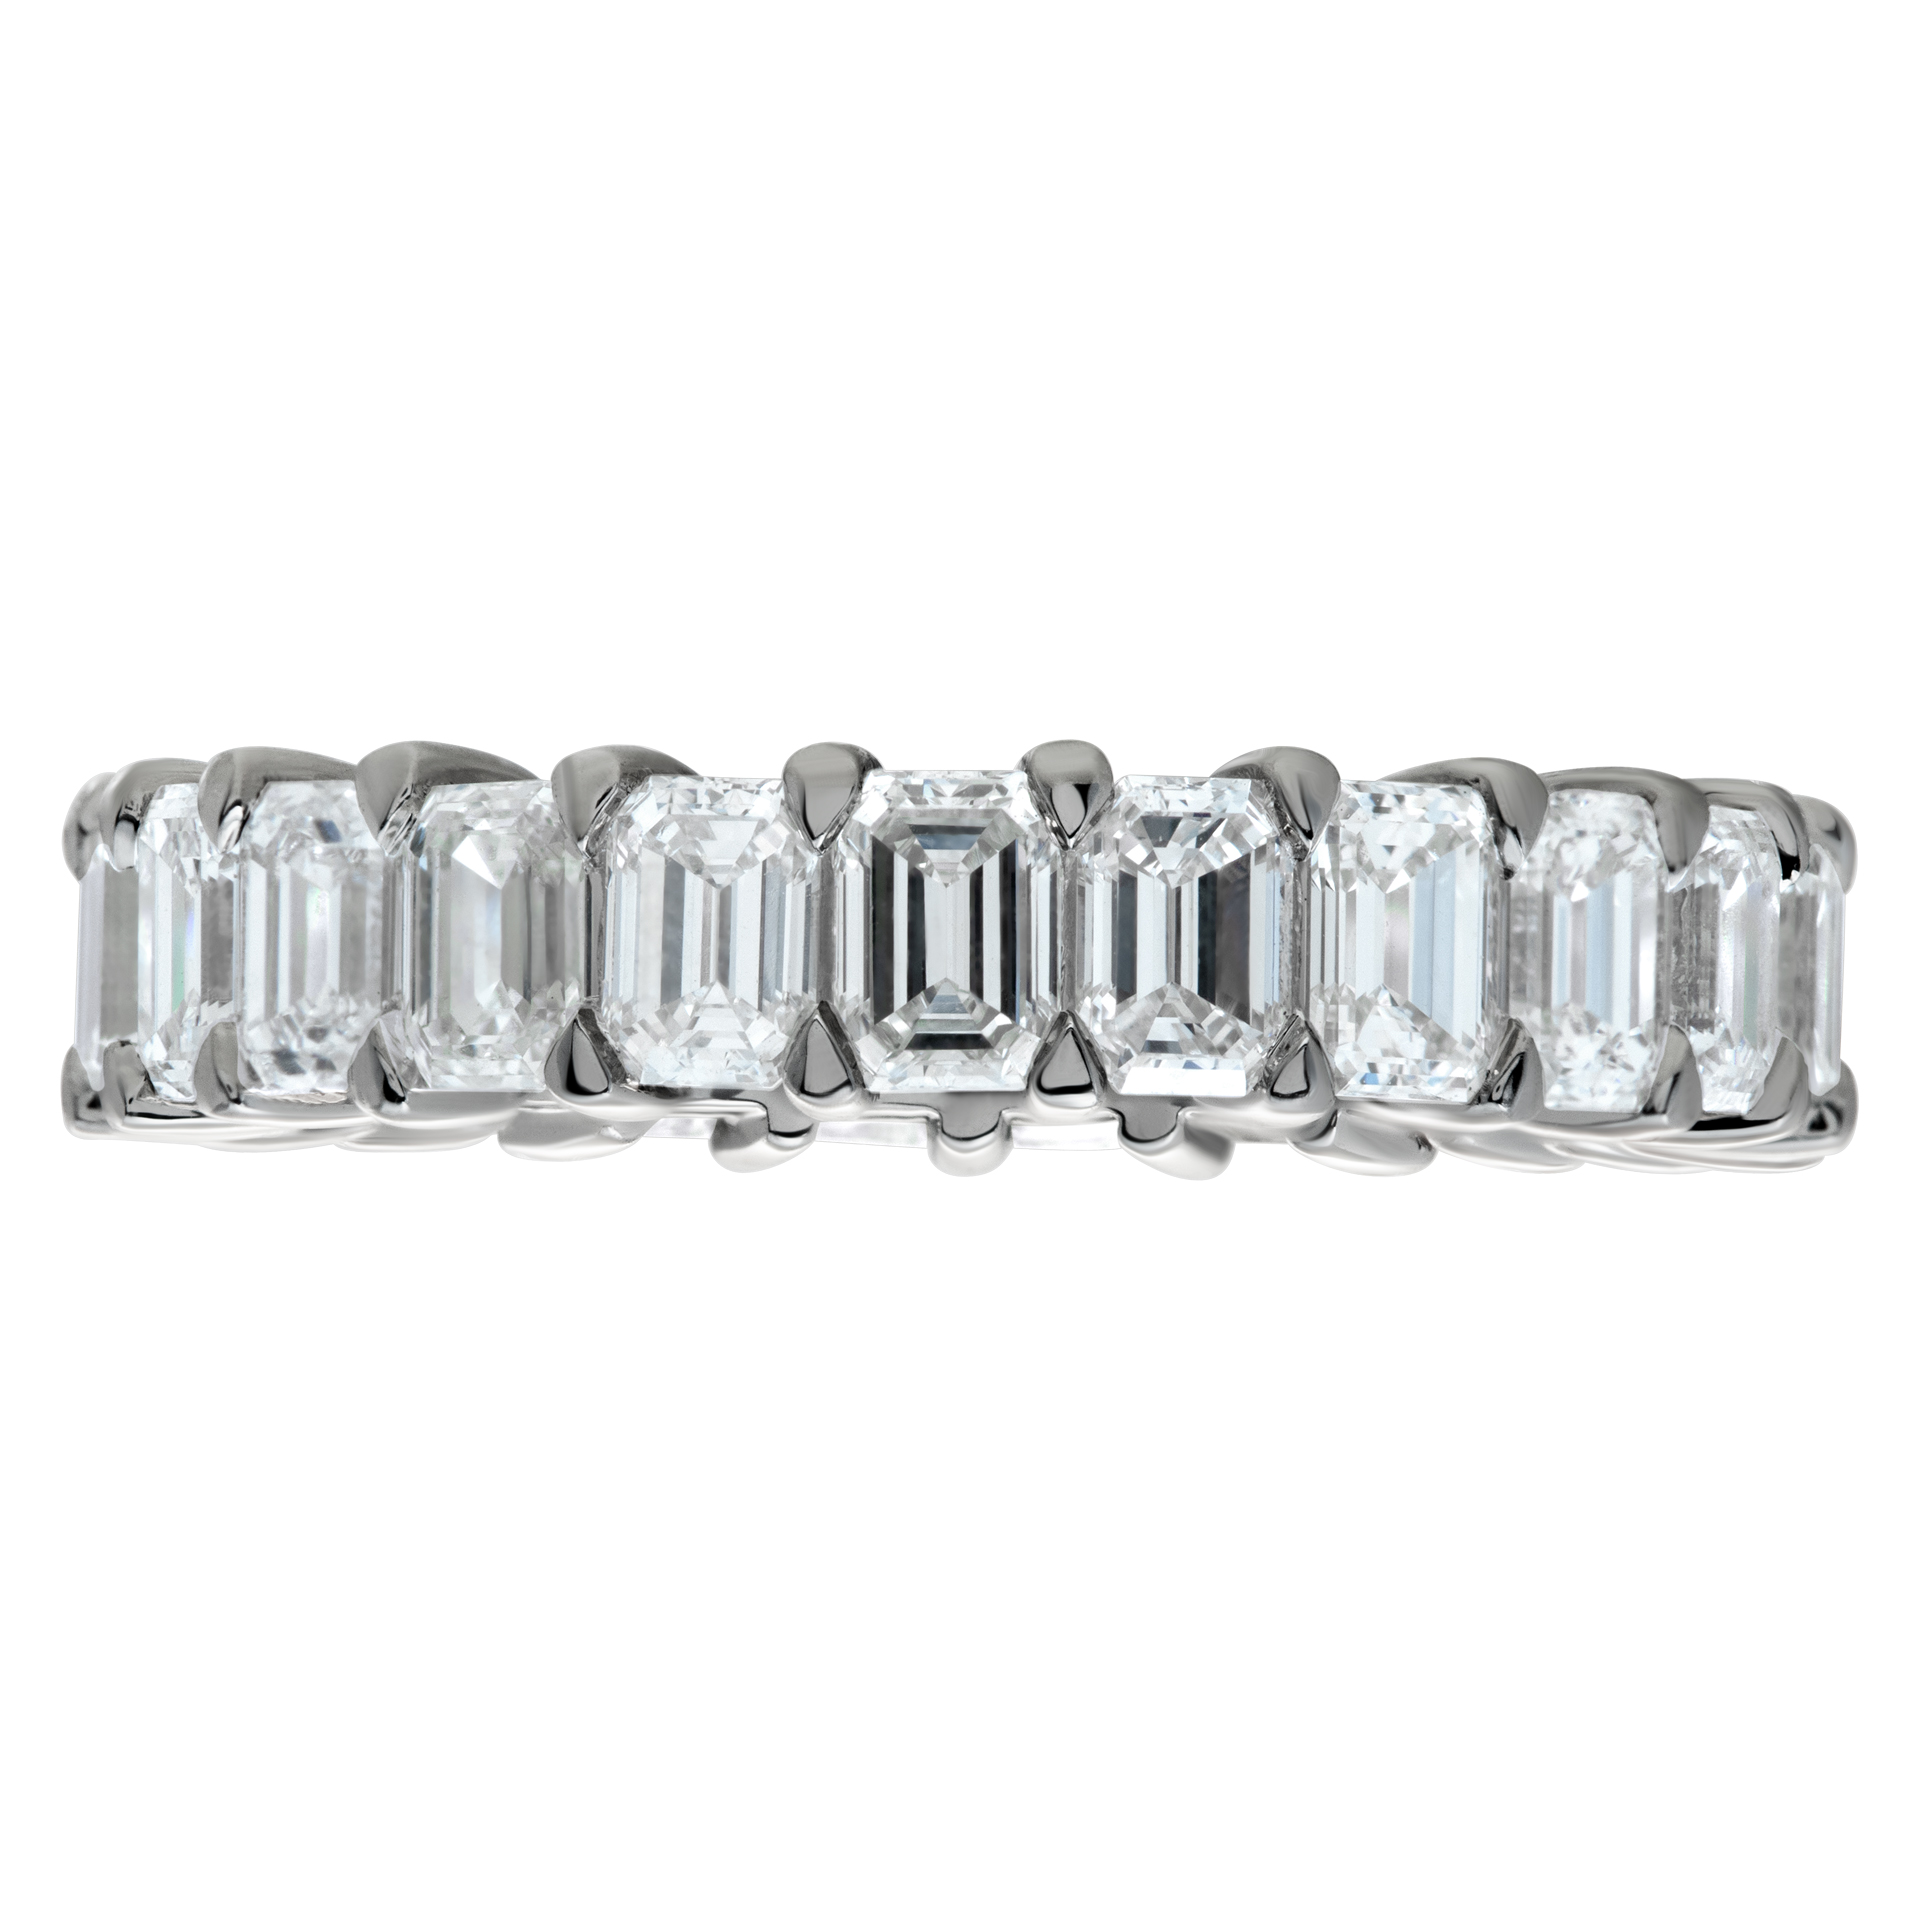 Emerald cut diamond eternity band 4.25 carats in G-H color, VS clarity image 2